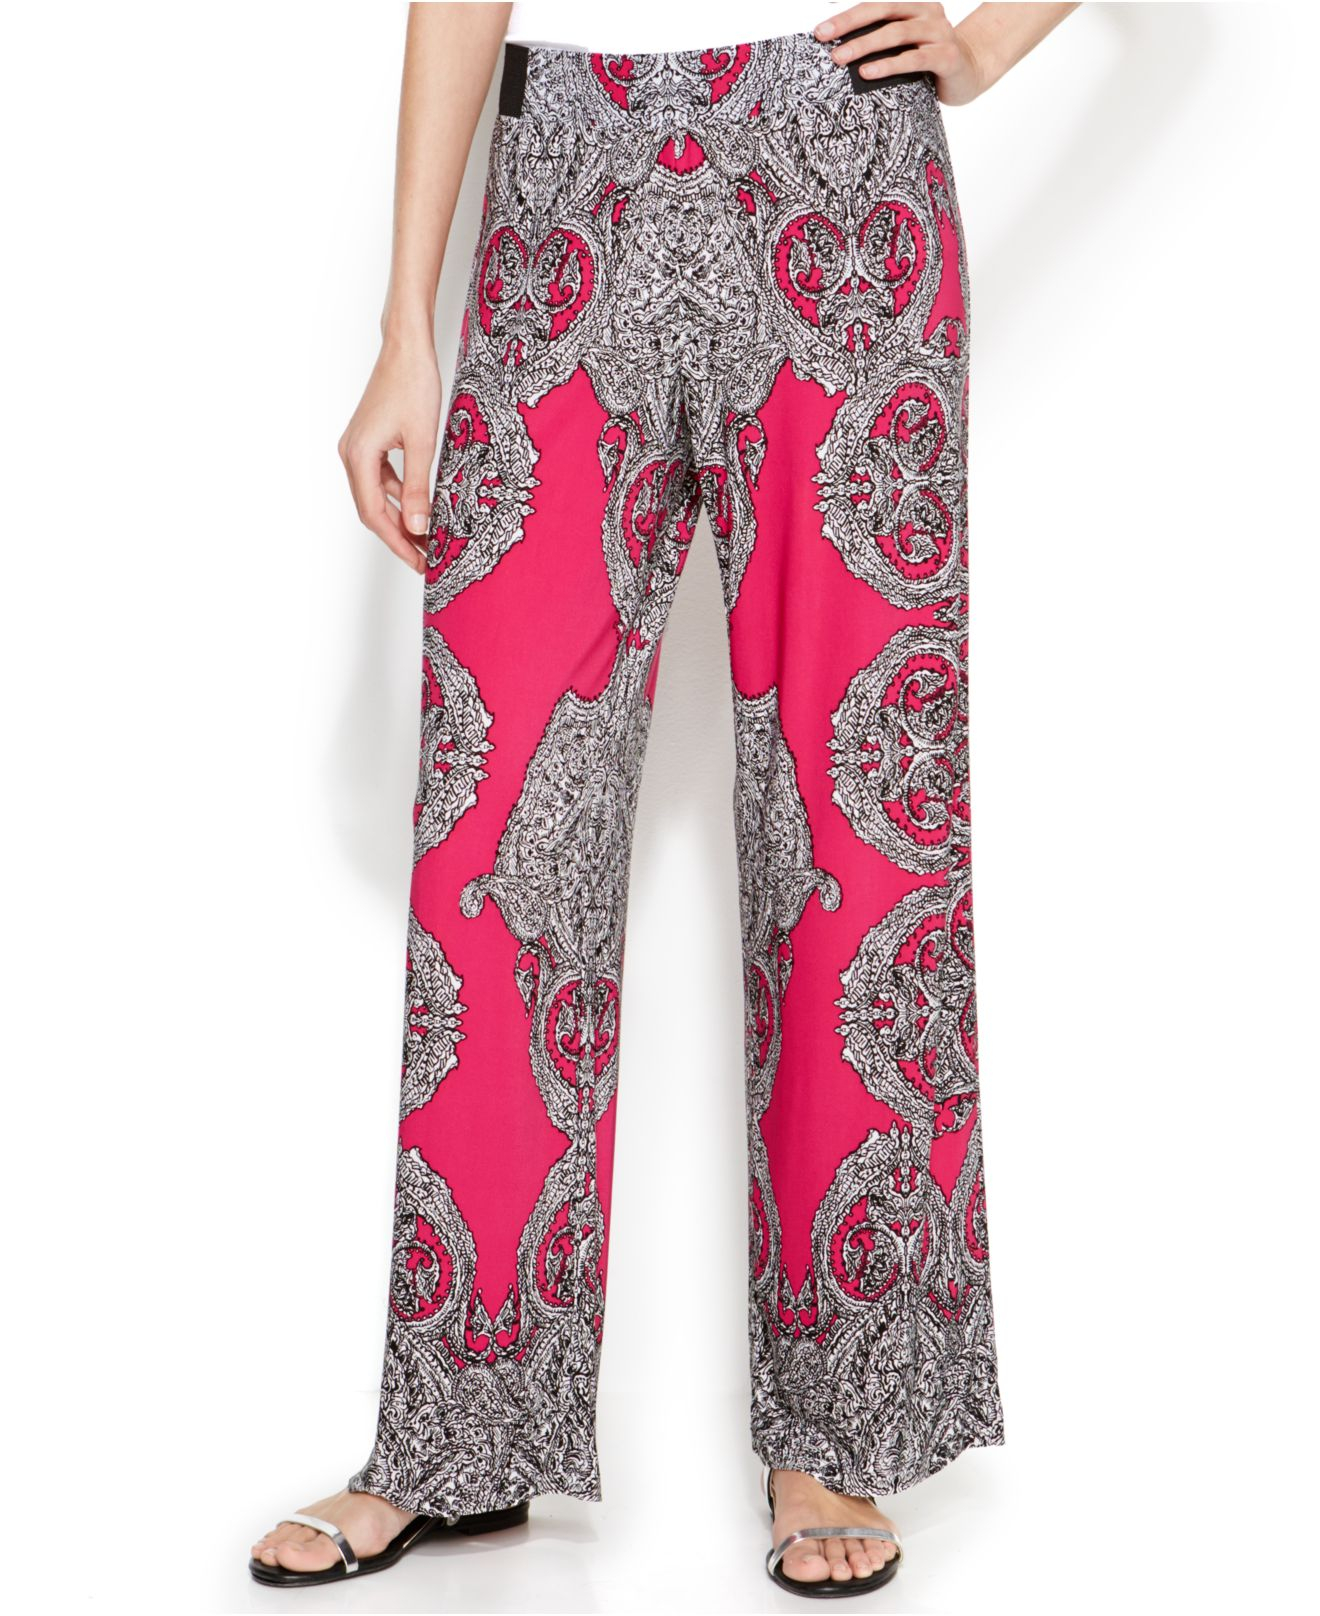 Lyst - Inc International Concepts Paisley-Print Wide-Leg Soft Pants in Pink